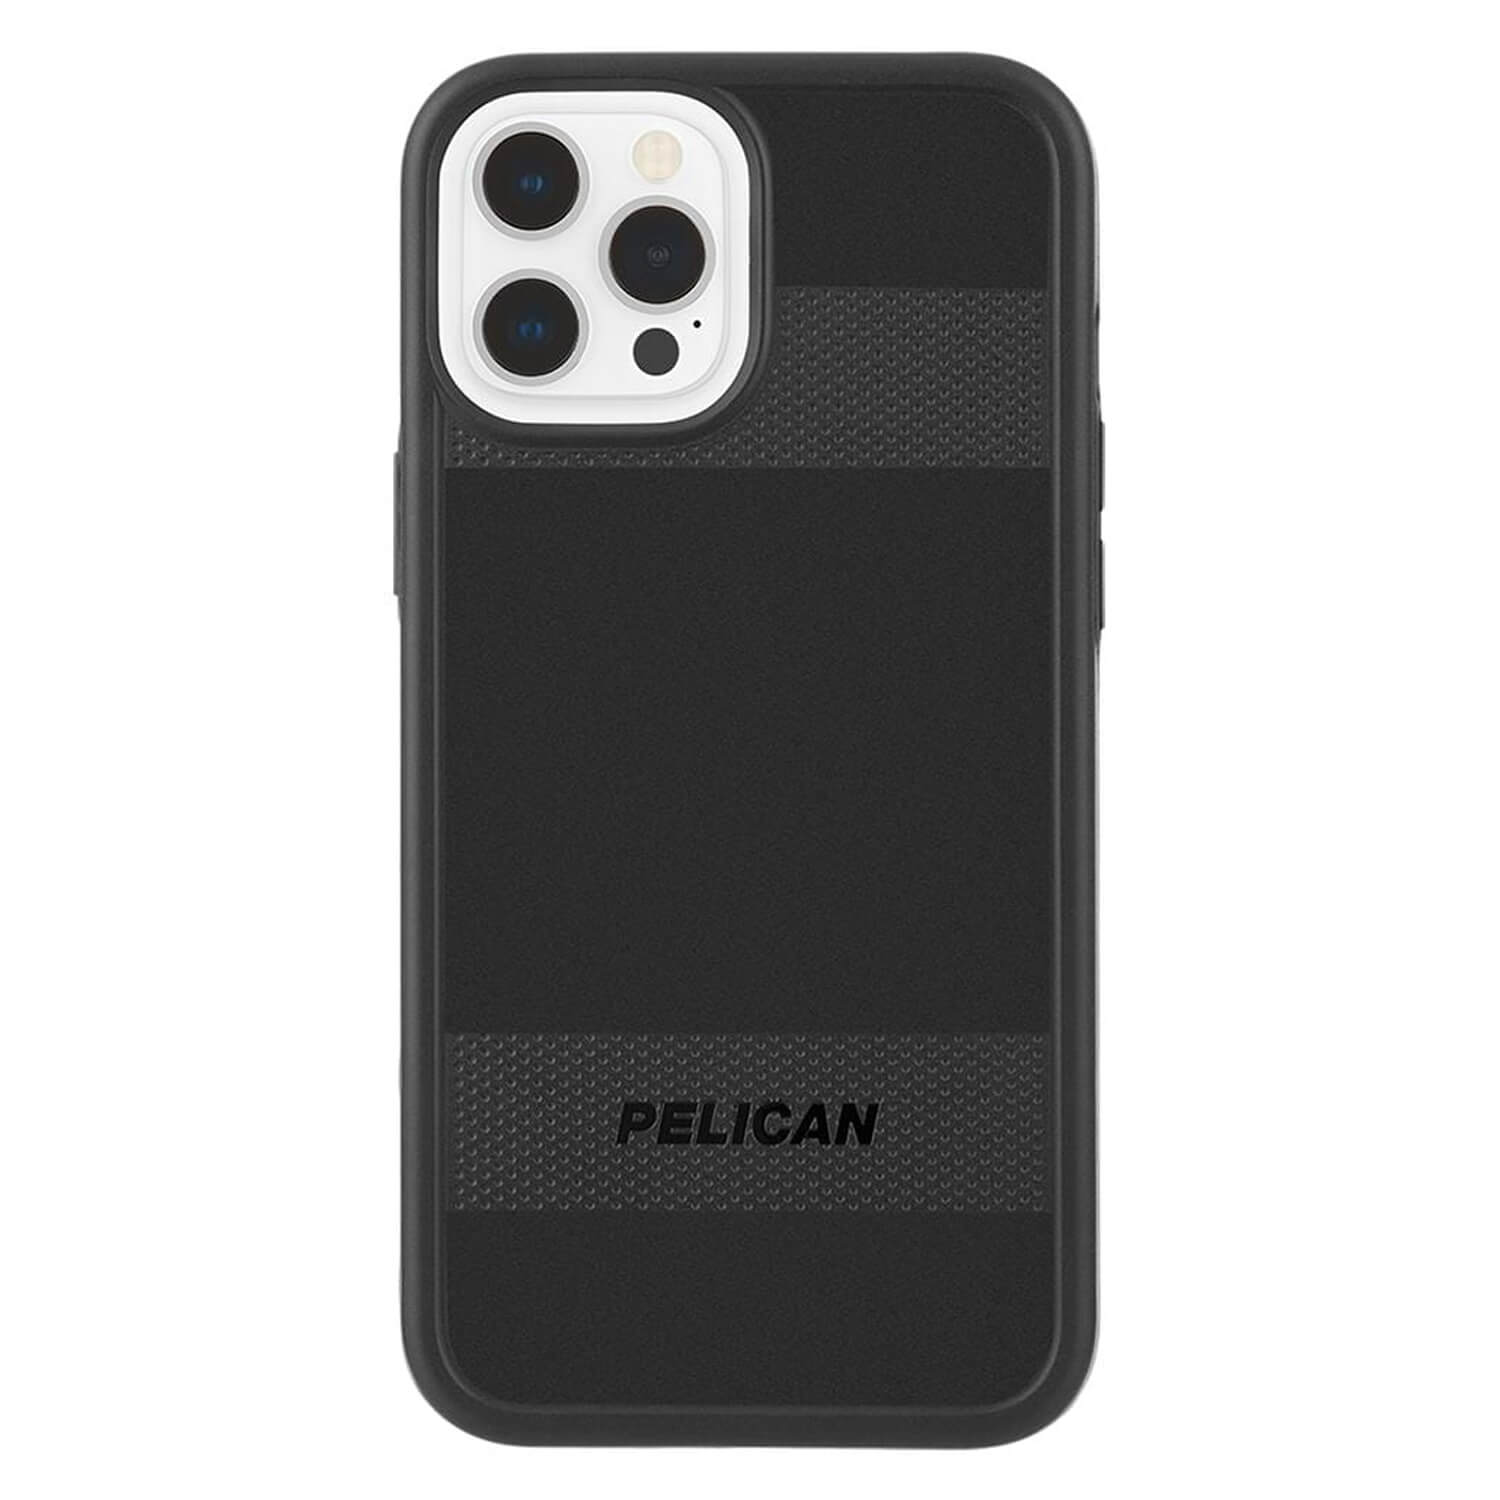 Pelican iPhone 13 Pro Max Case Protector Antimicrobial Black